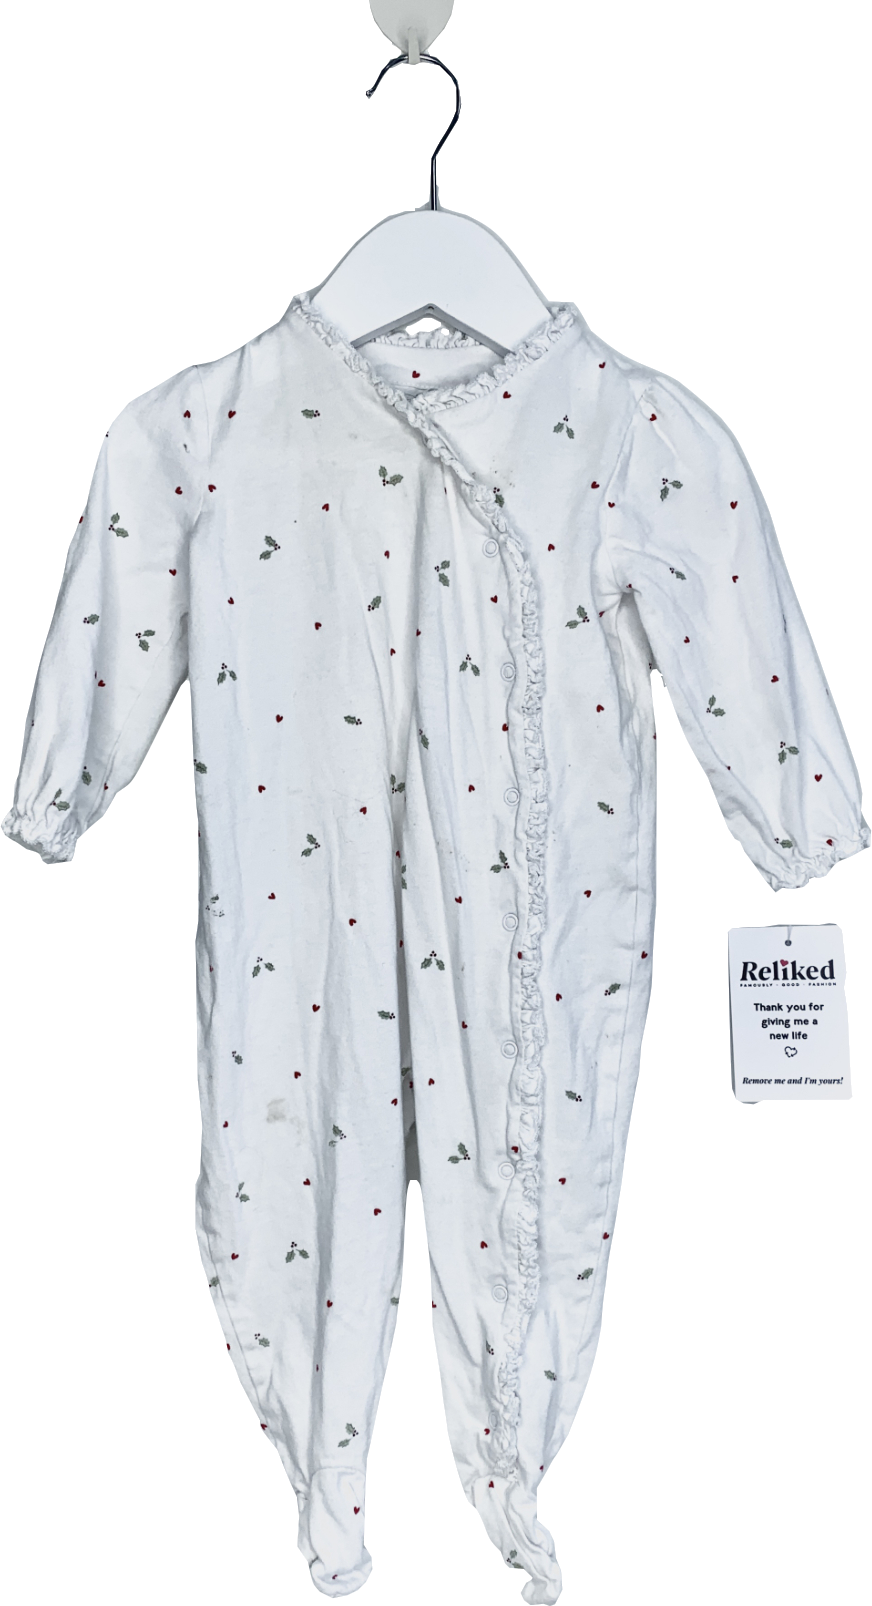 The Little White Company White Organic Cotton Hearts & Holly Frill Wrap Sleepsuit 9-12 Months